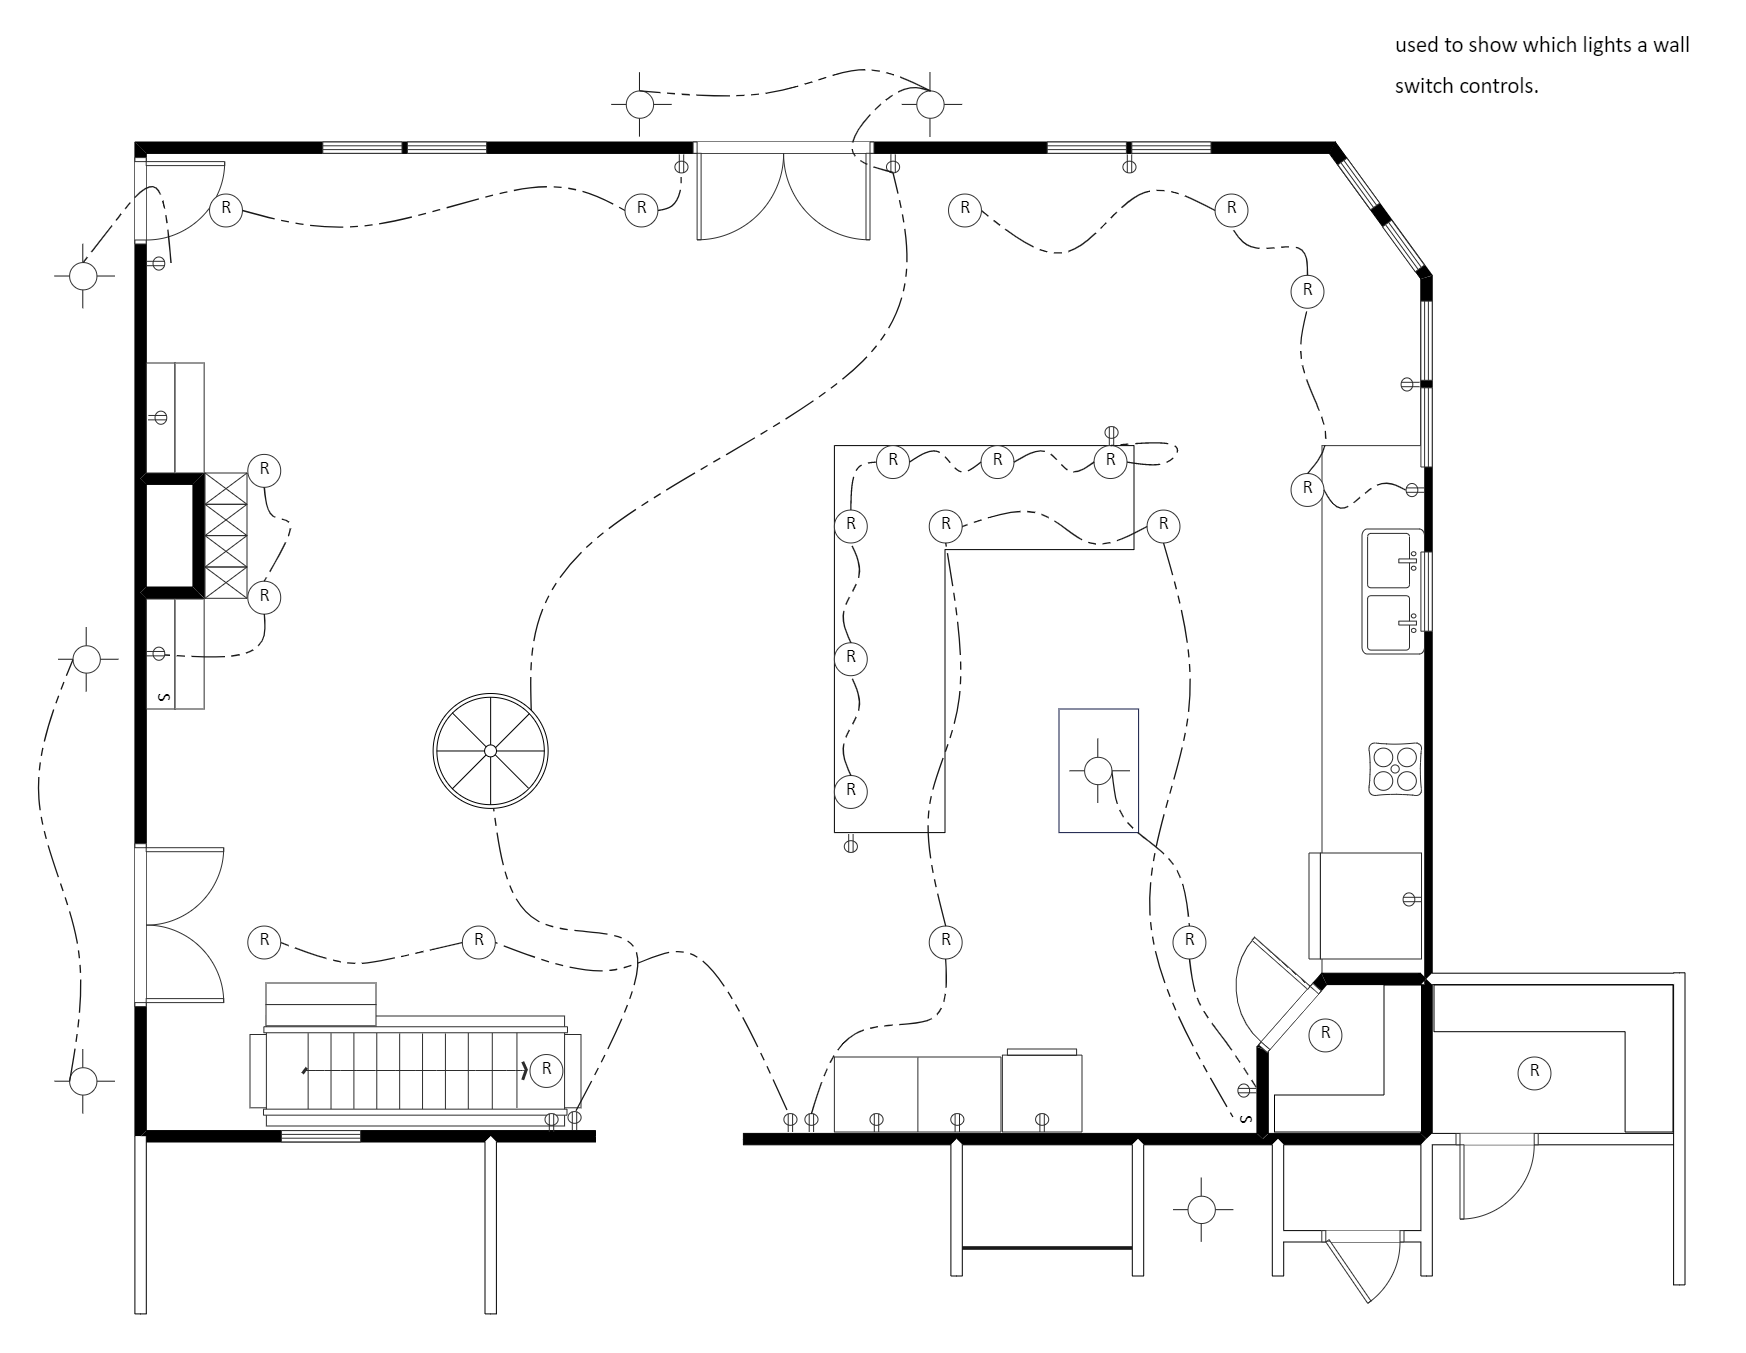 Electrical Plan for Basement